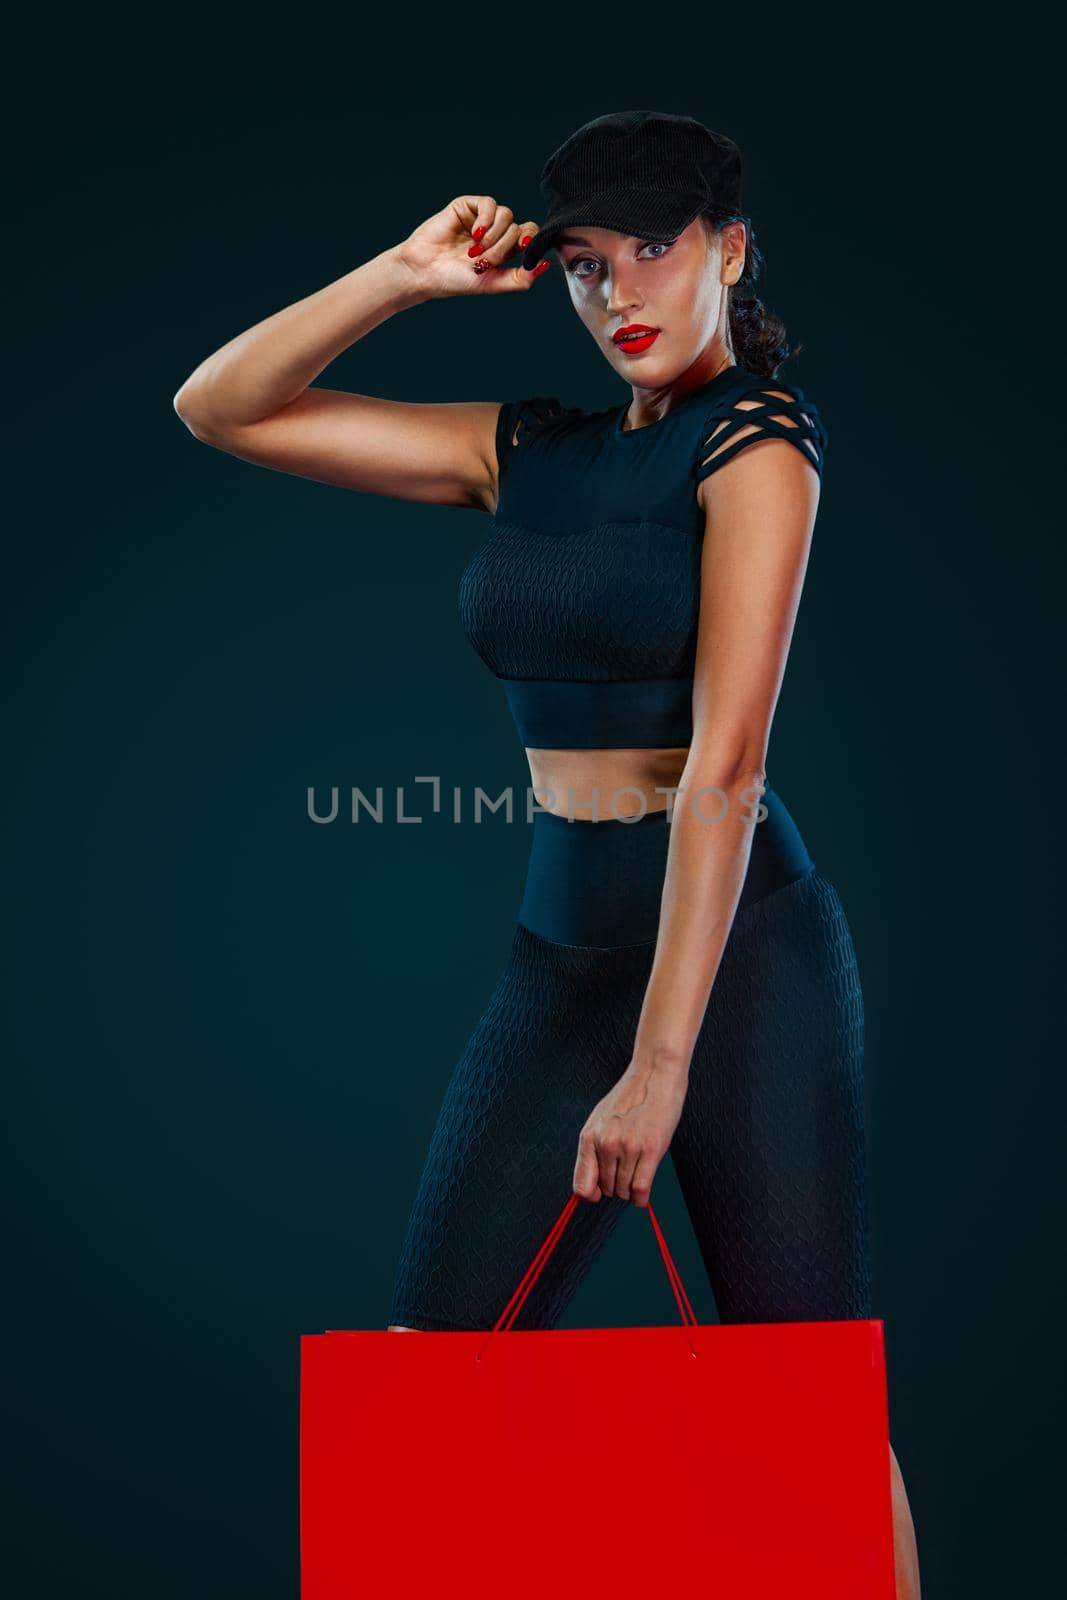 Black friday sale concept for fitness shop. Shopping woman in sportswear and hat holding red bag isolated on dark background by MikeOrlov